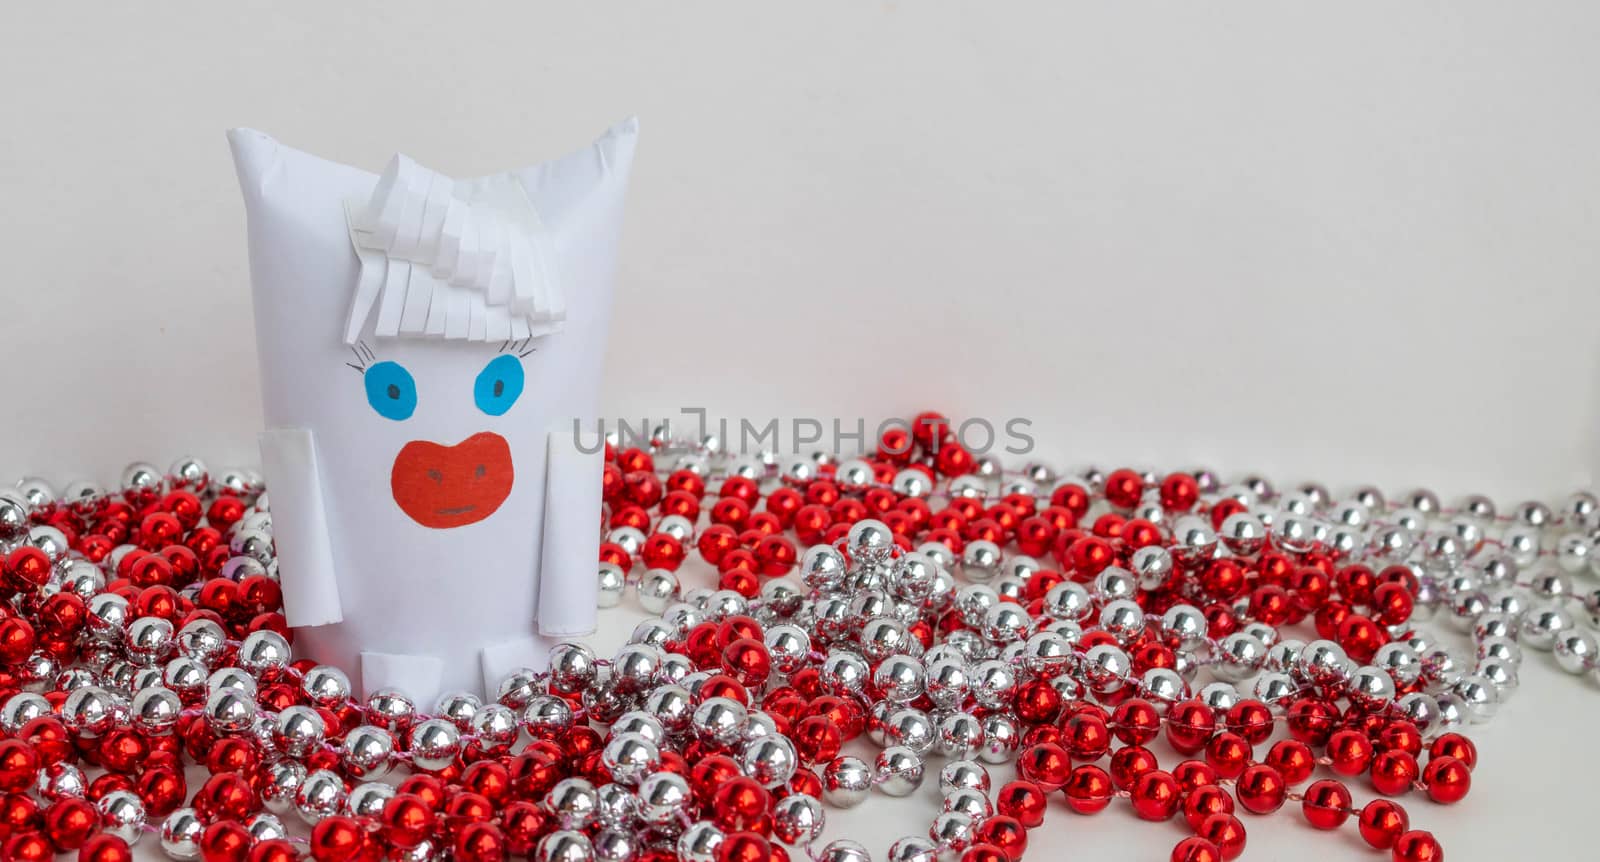 White paper bull as a symbol of New year and Christmas 2021 with red and silver beads on a white background by lapushka62